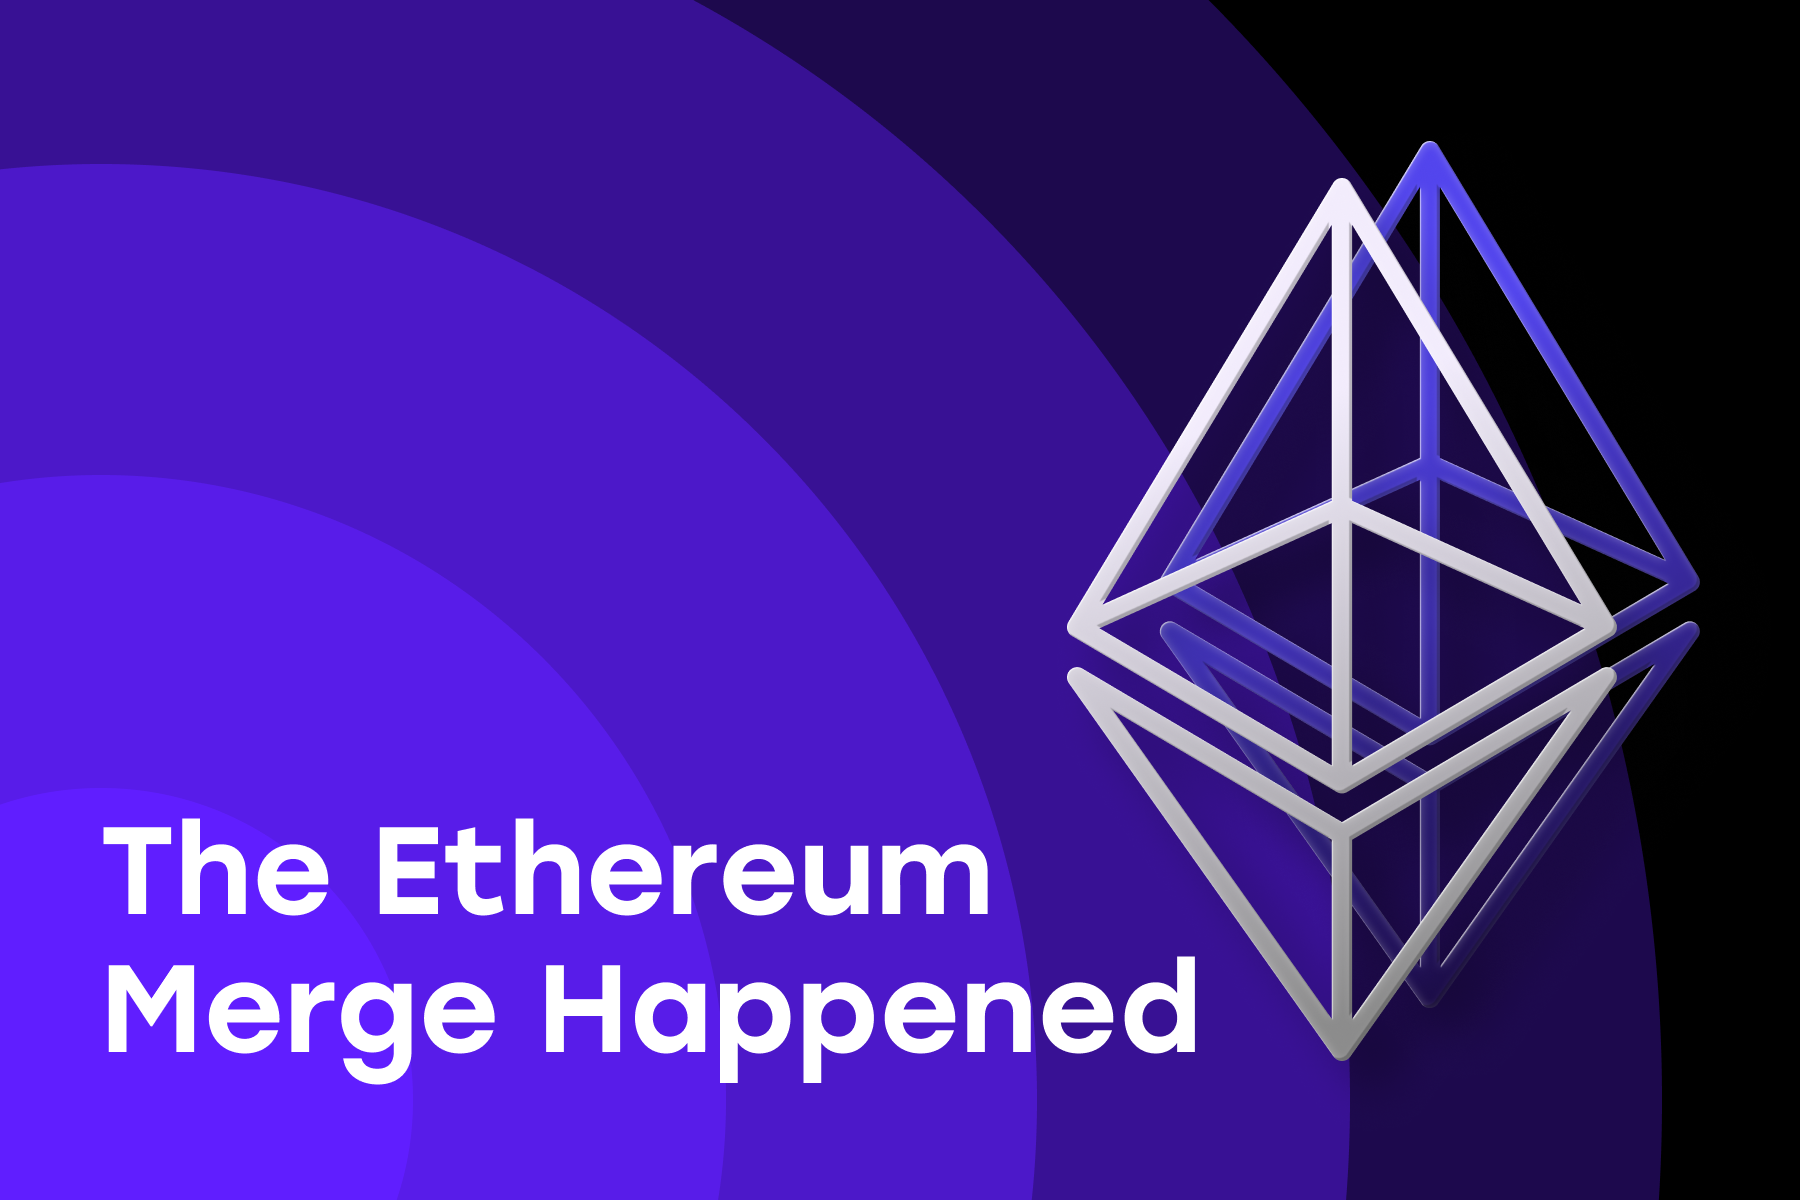 The Ethereum Merge Happened - So What?